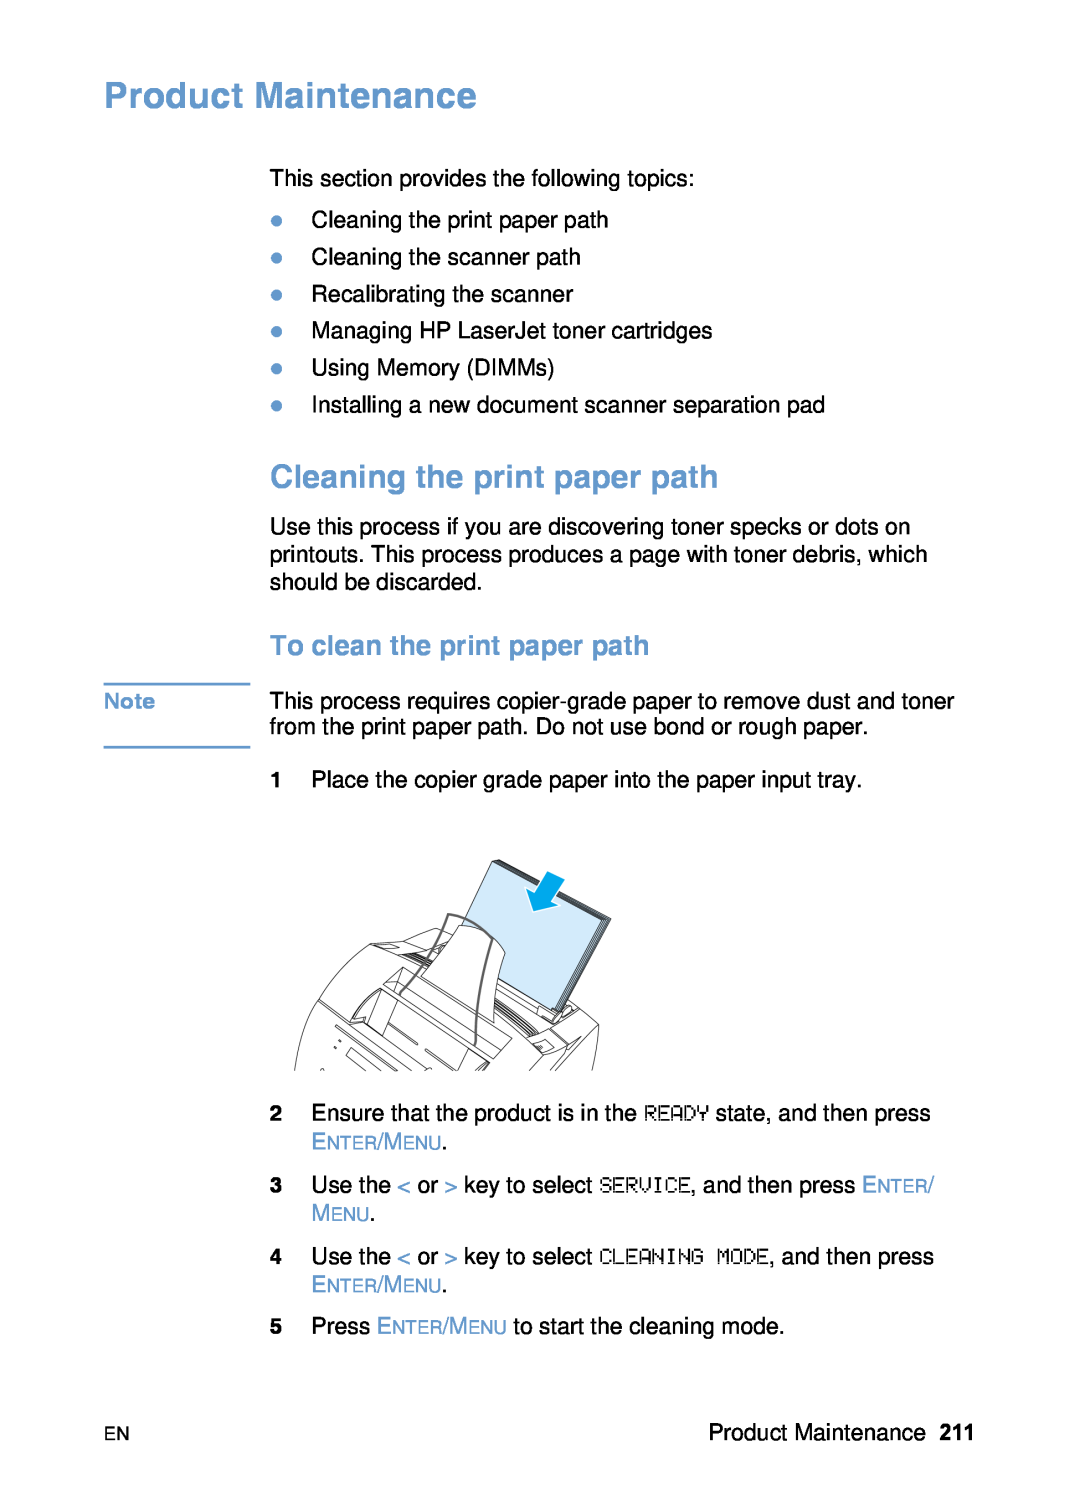 HP 3200 manual Product Maintenance, Cleaning the print paper path, To clean the print paper path 